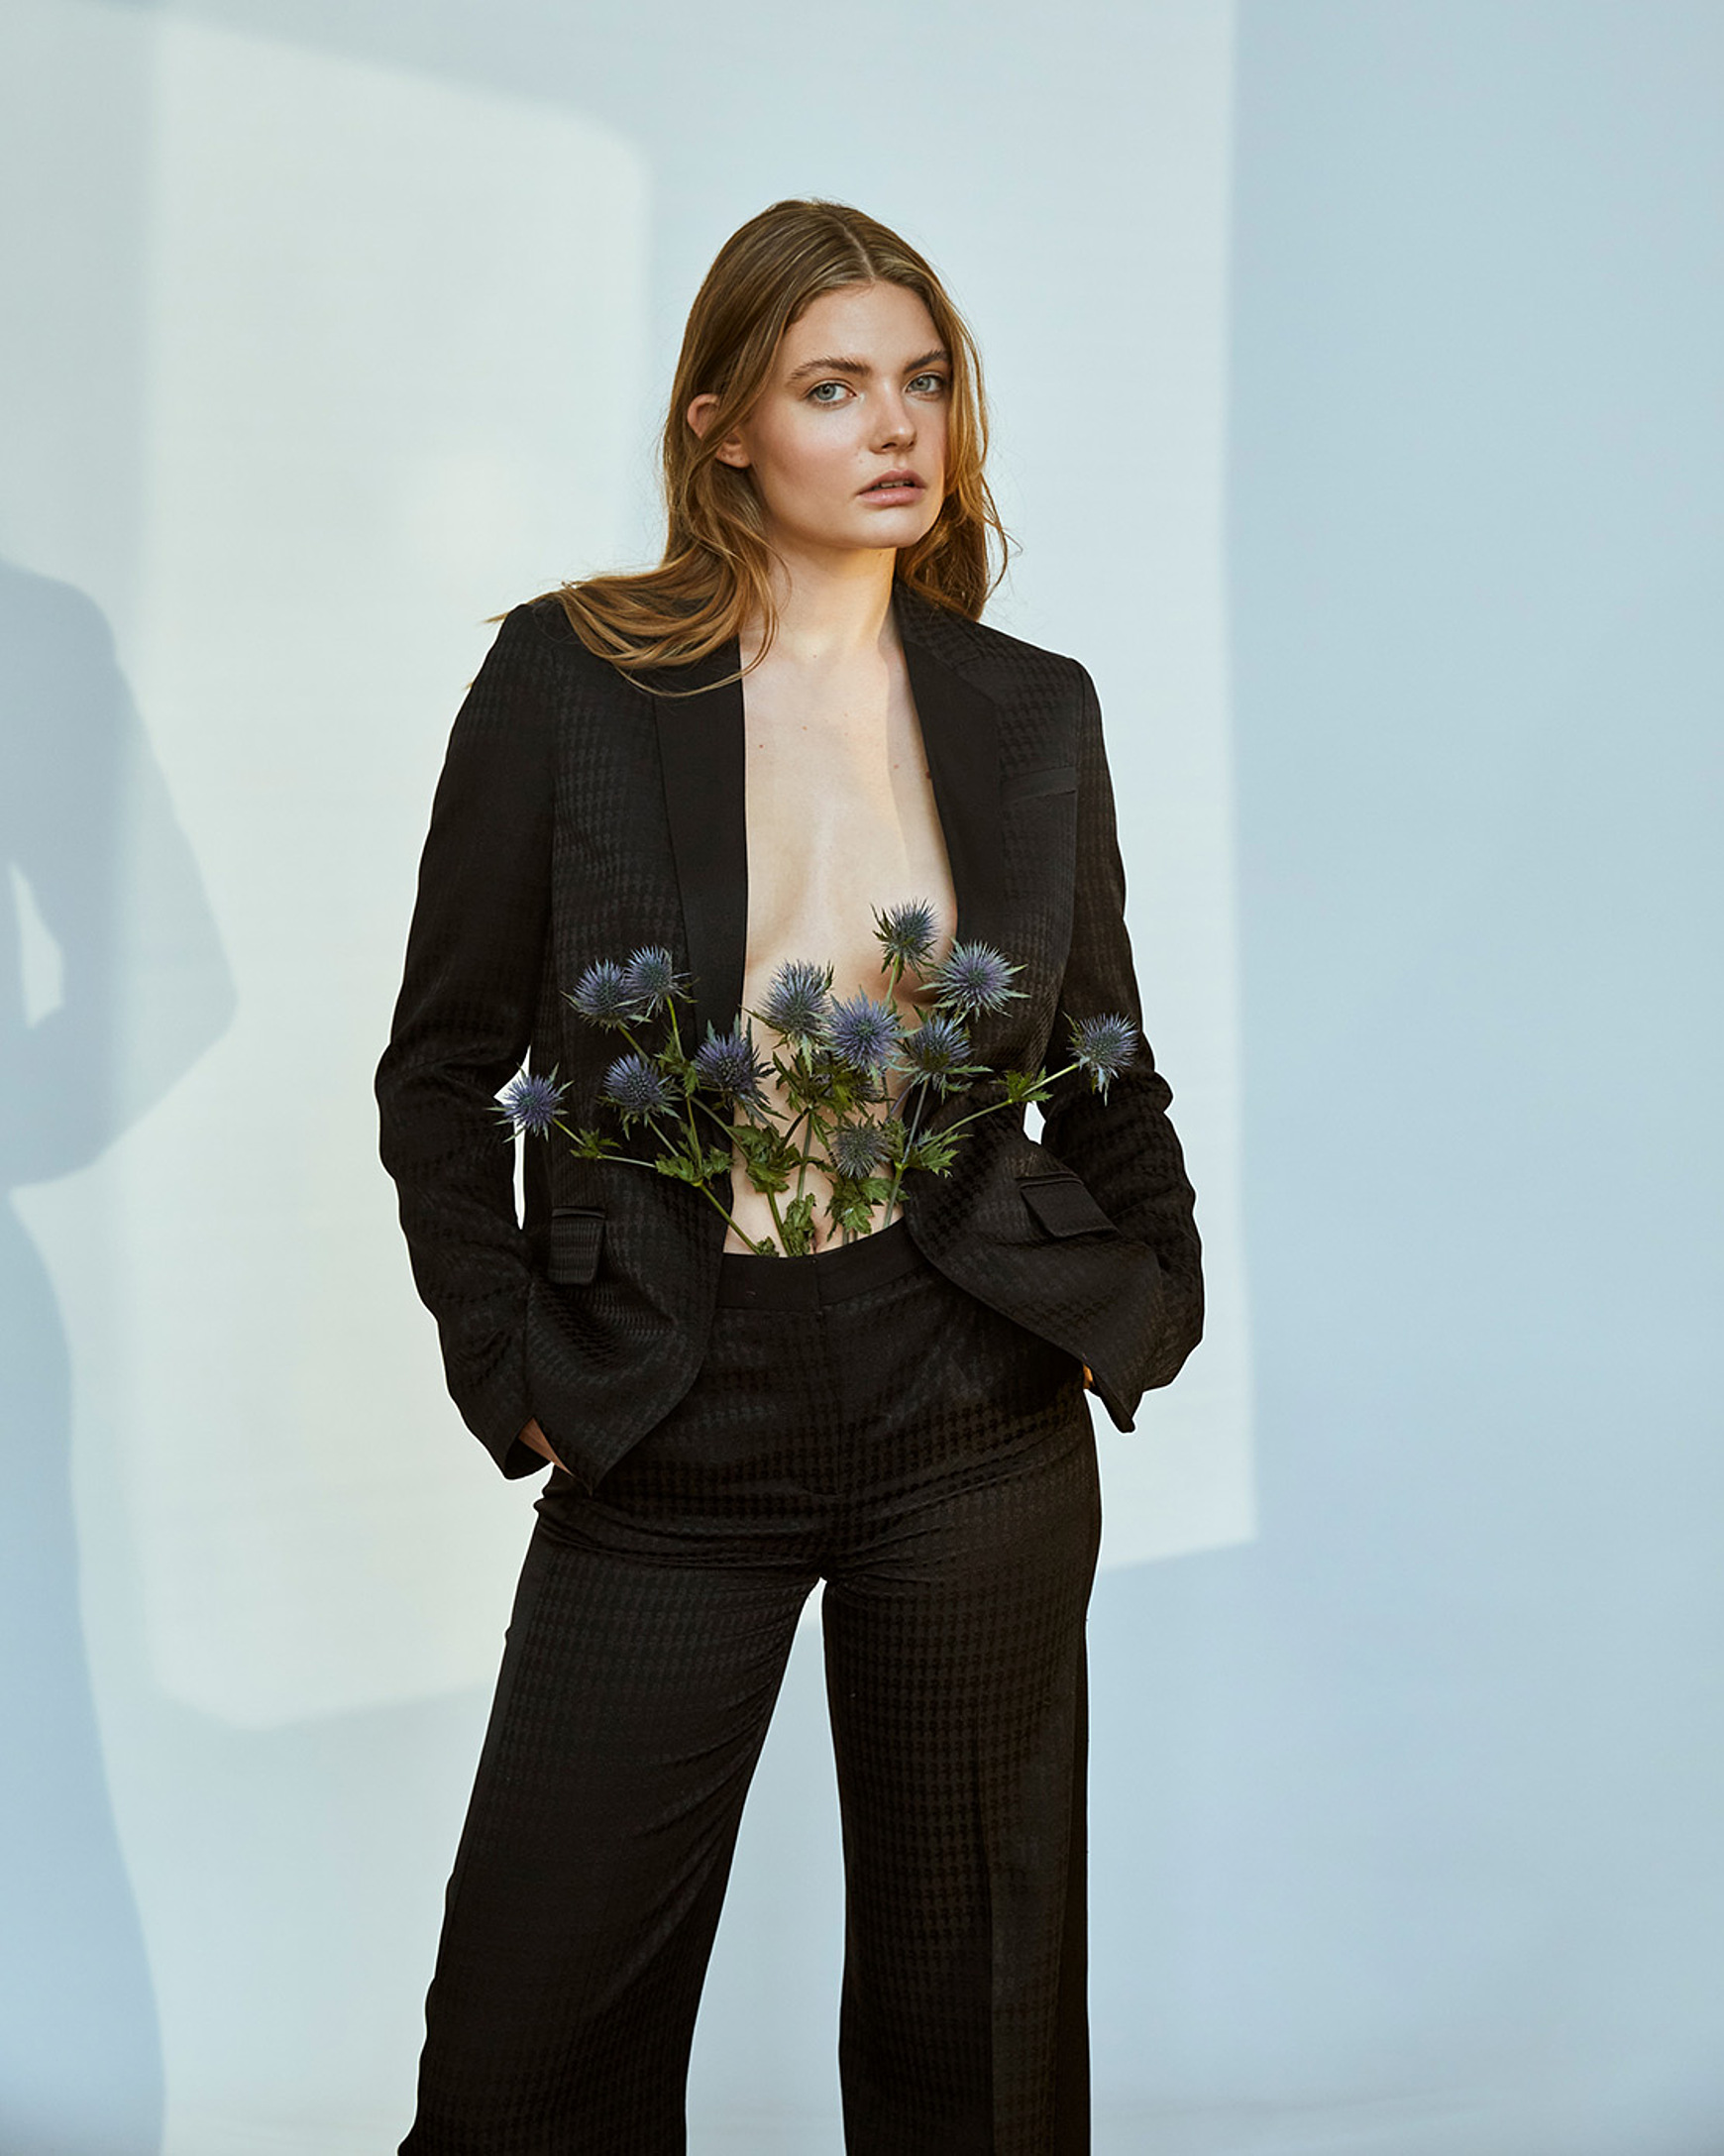 A women in a black suit of Karl Lagerfeld and thistles in front of her body